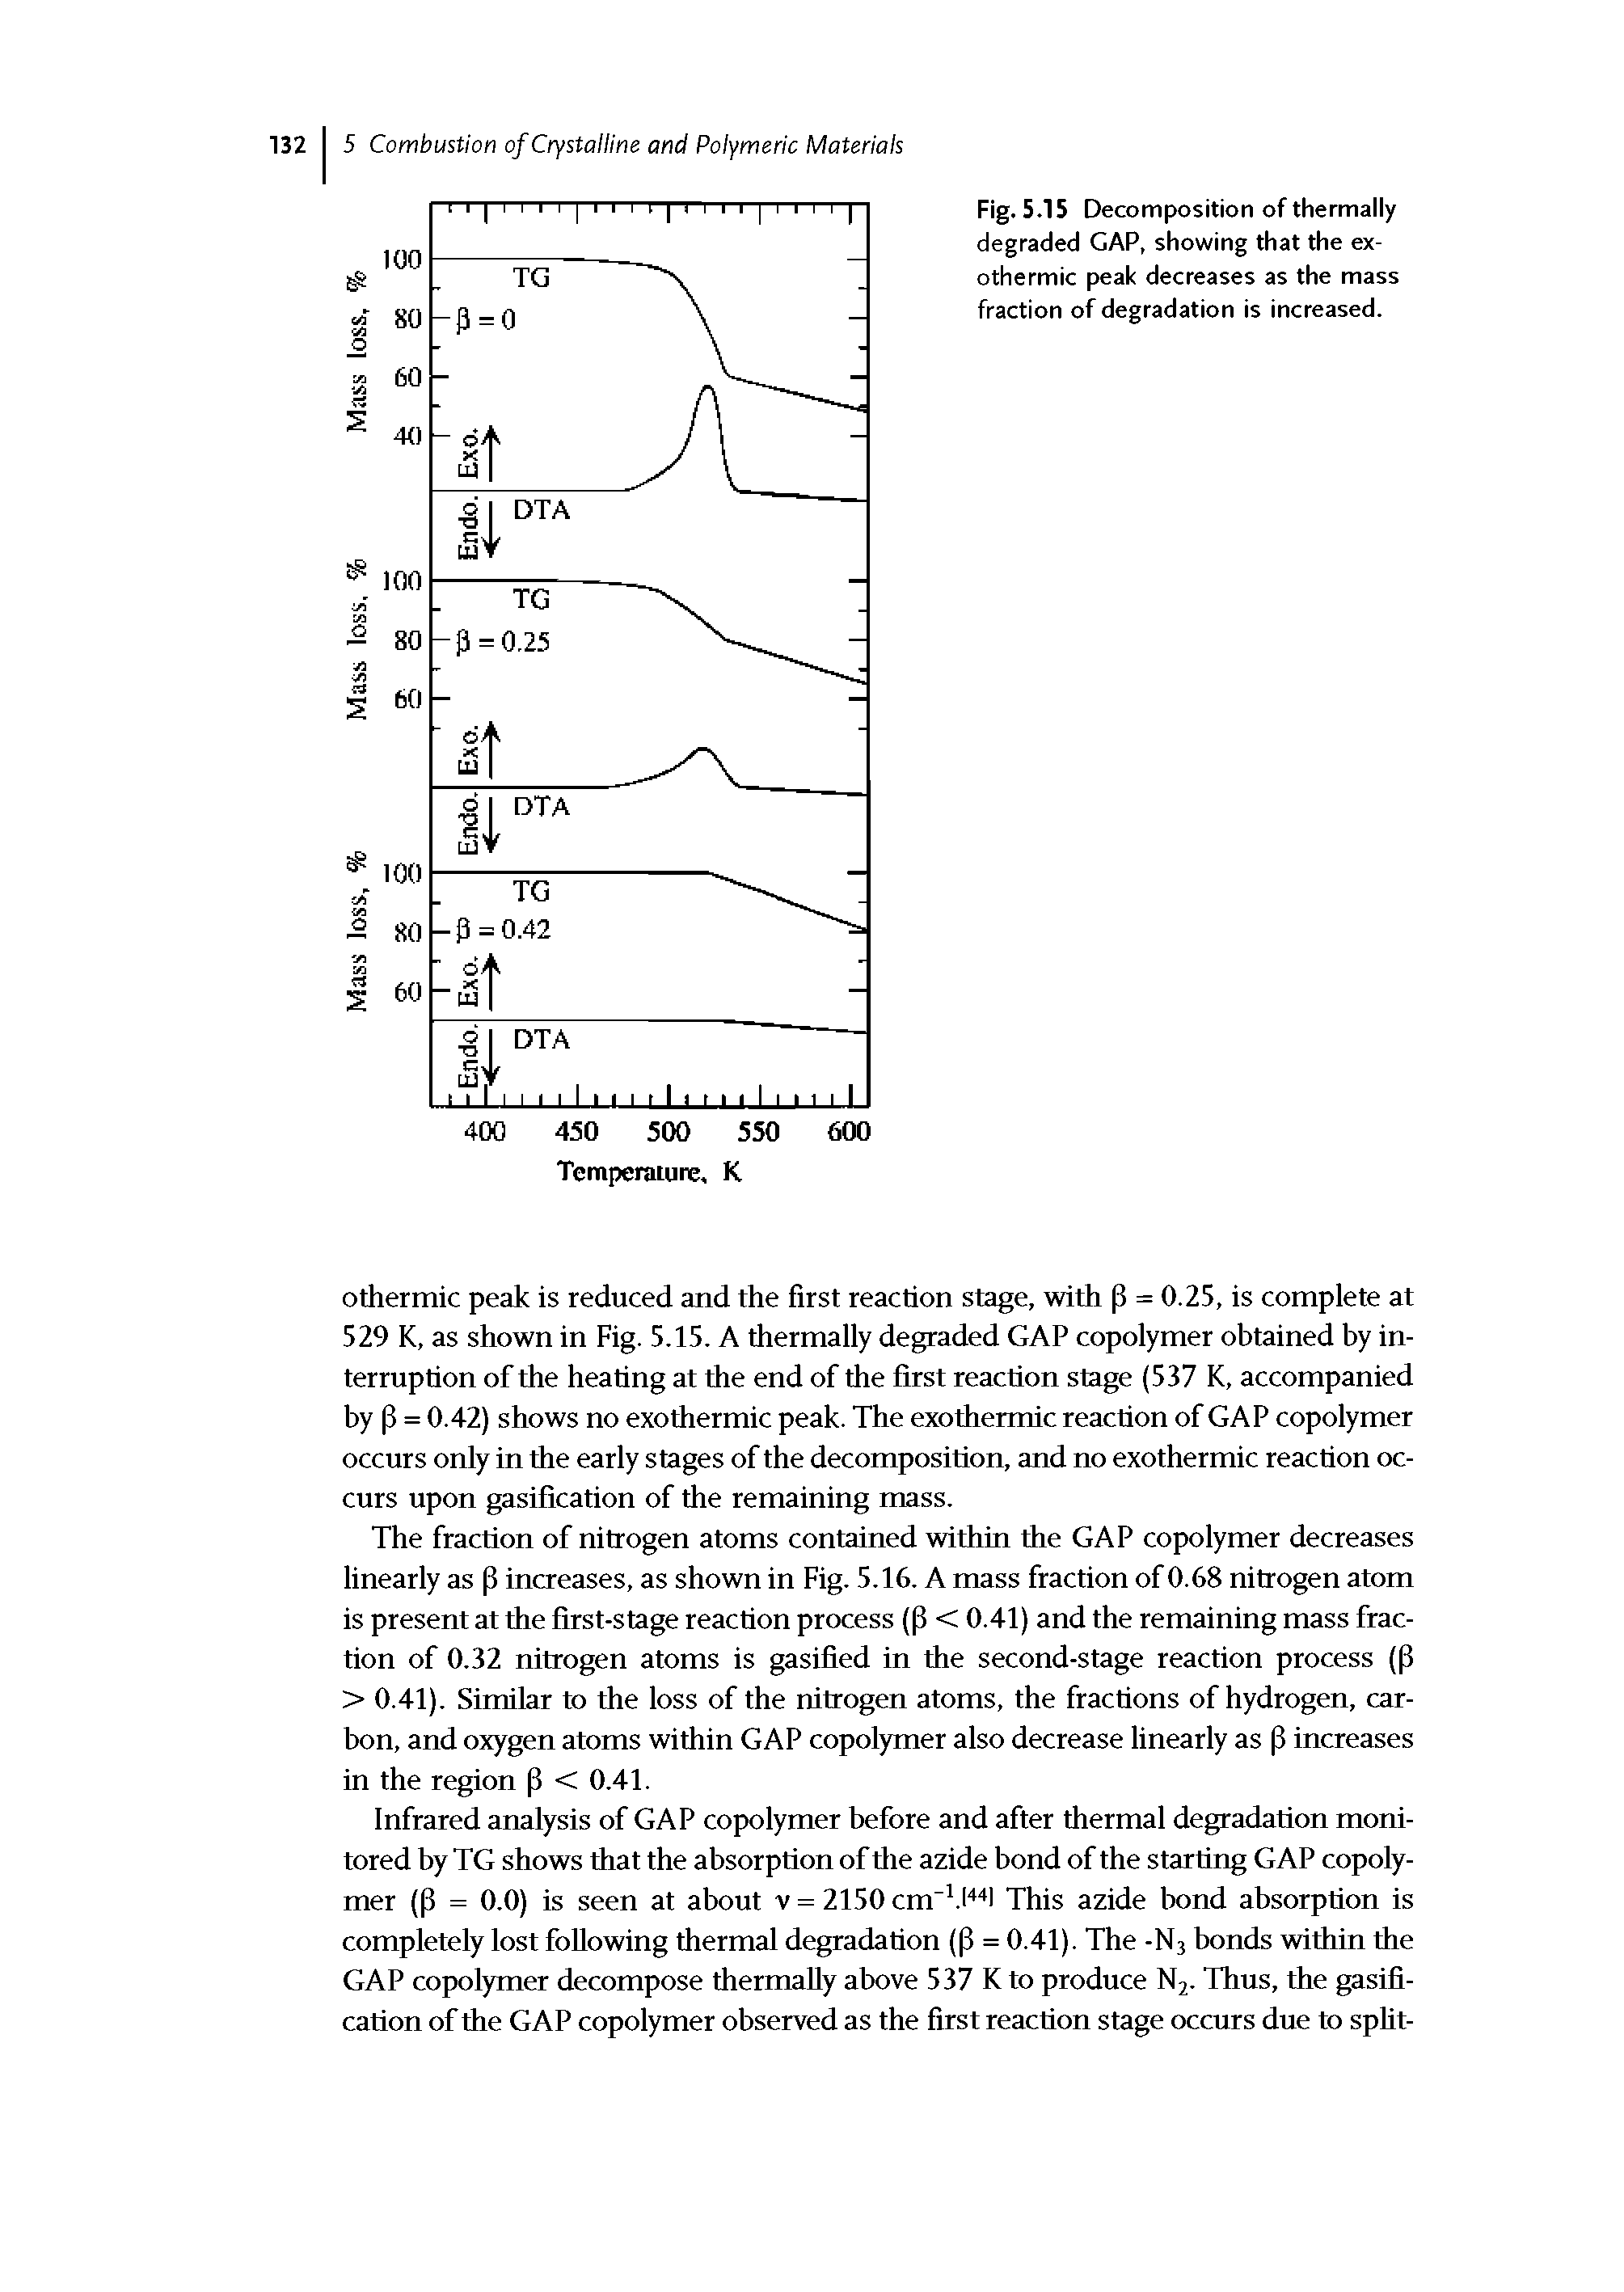 Fig. 5.15 Decomposition of thermaiiy degraded GAP, showing that the exothermic peak decreases as the mass fraction of degradation is increased.